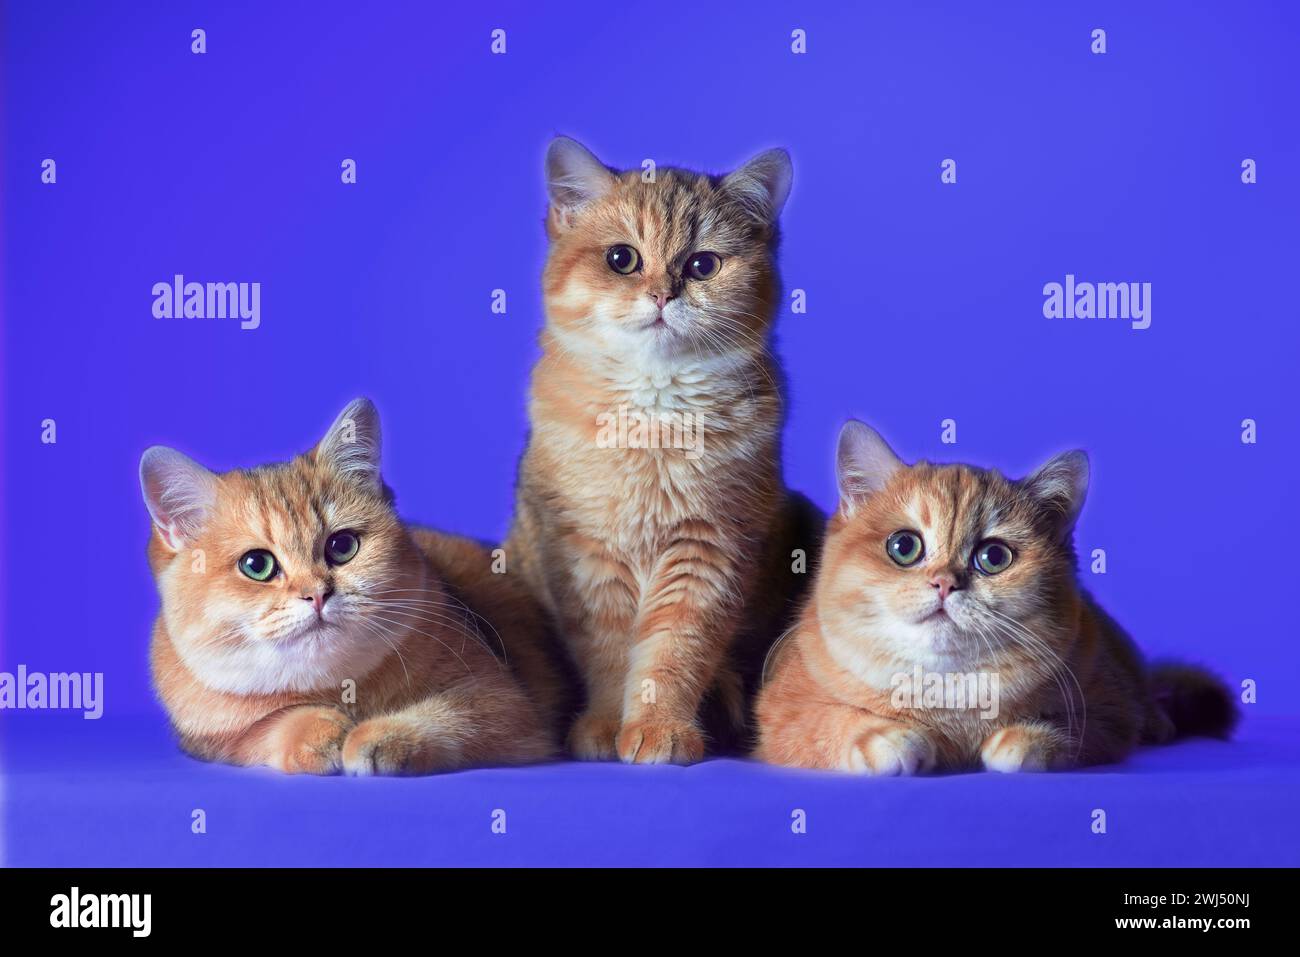 Three red-haired British shorthair kittens on a blue background Stock Photo